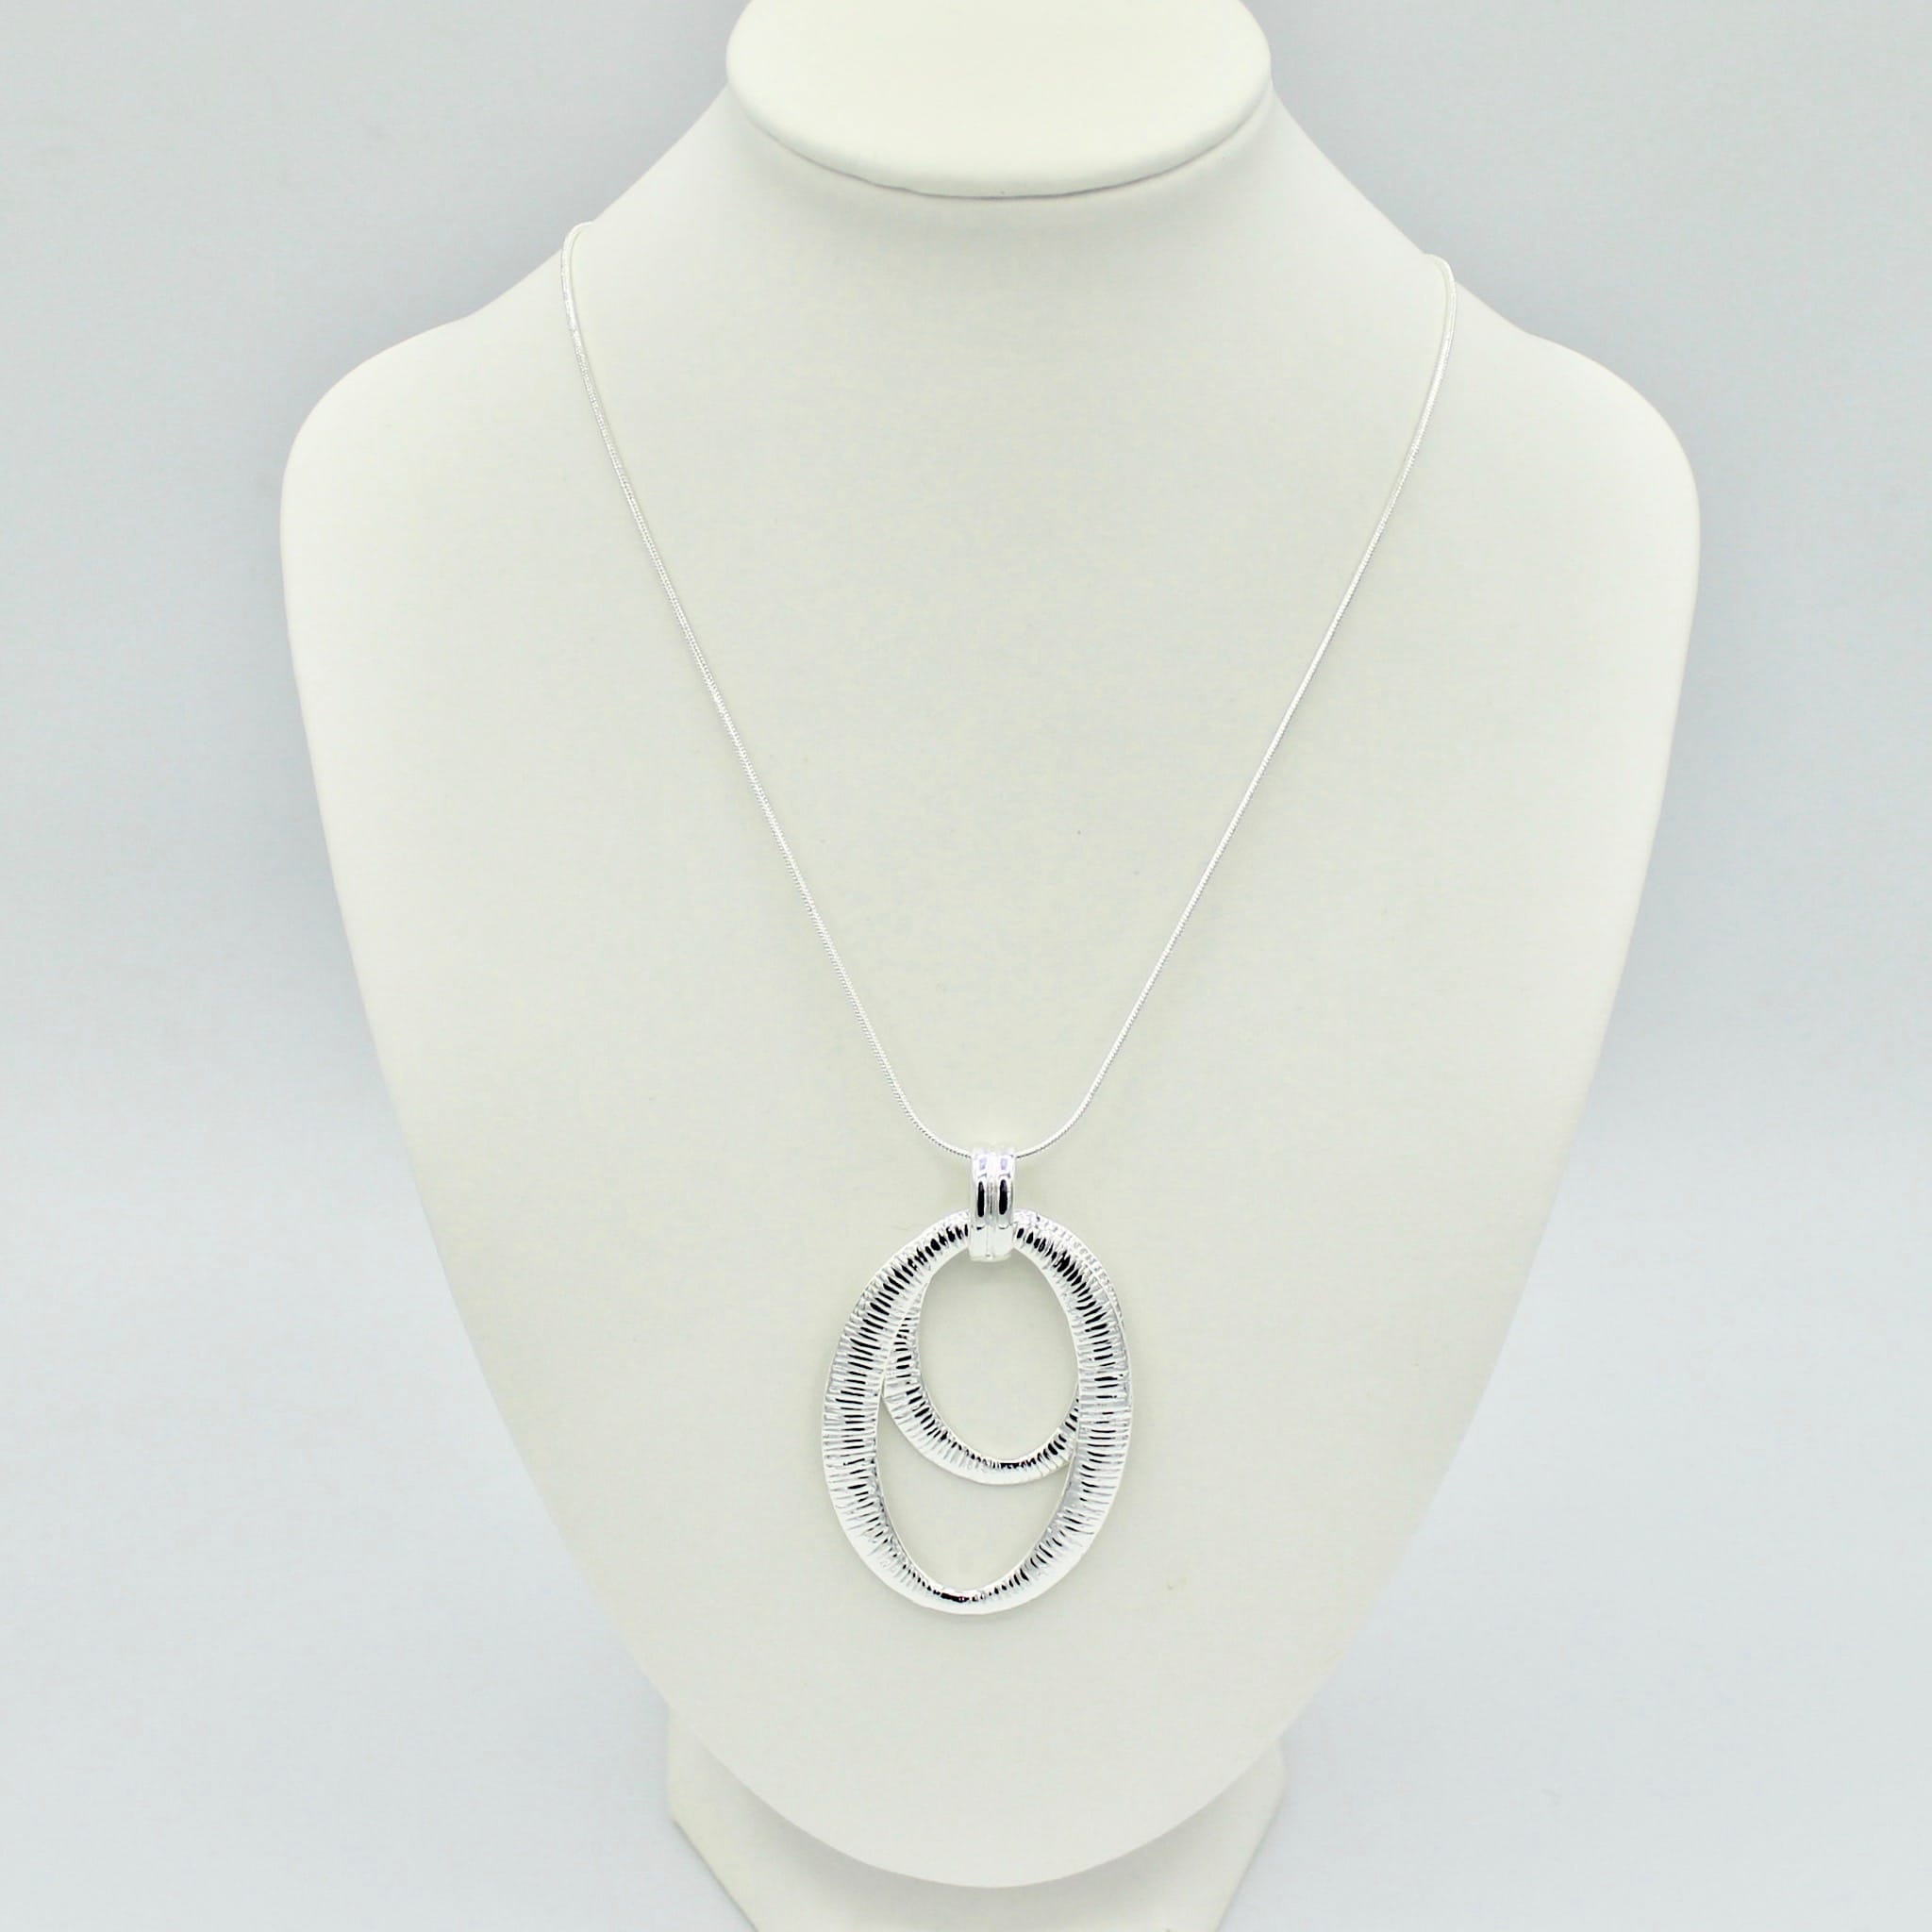 Oval and Circle Pendant necklace